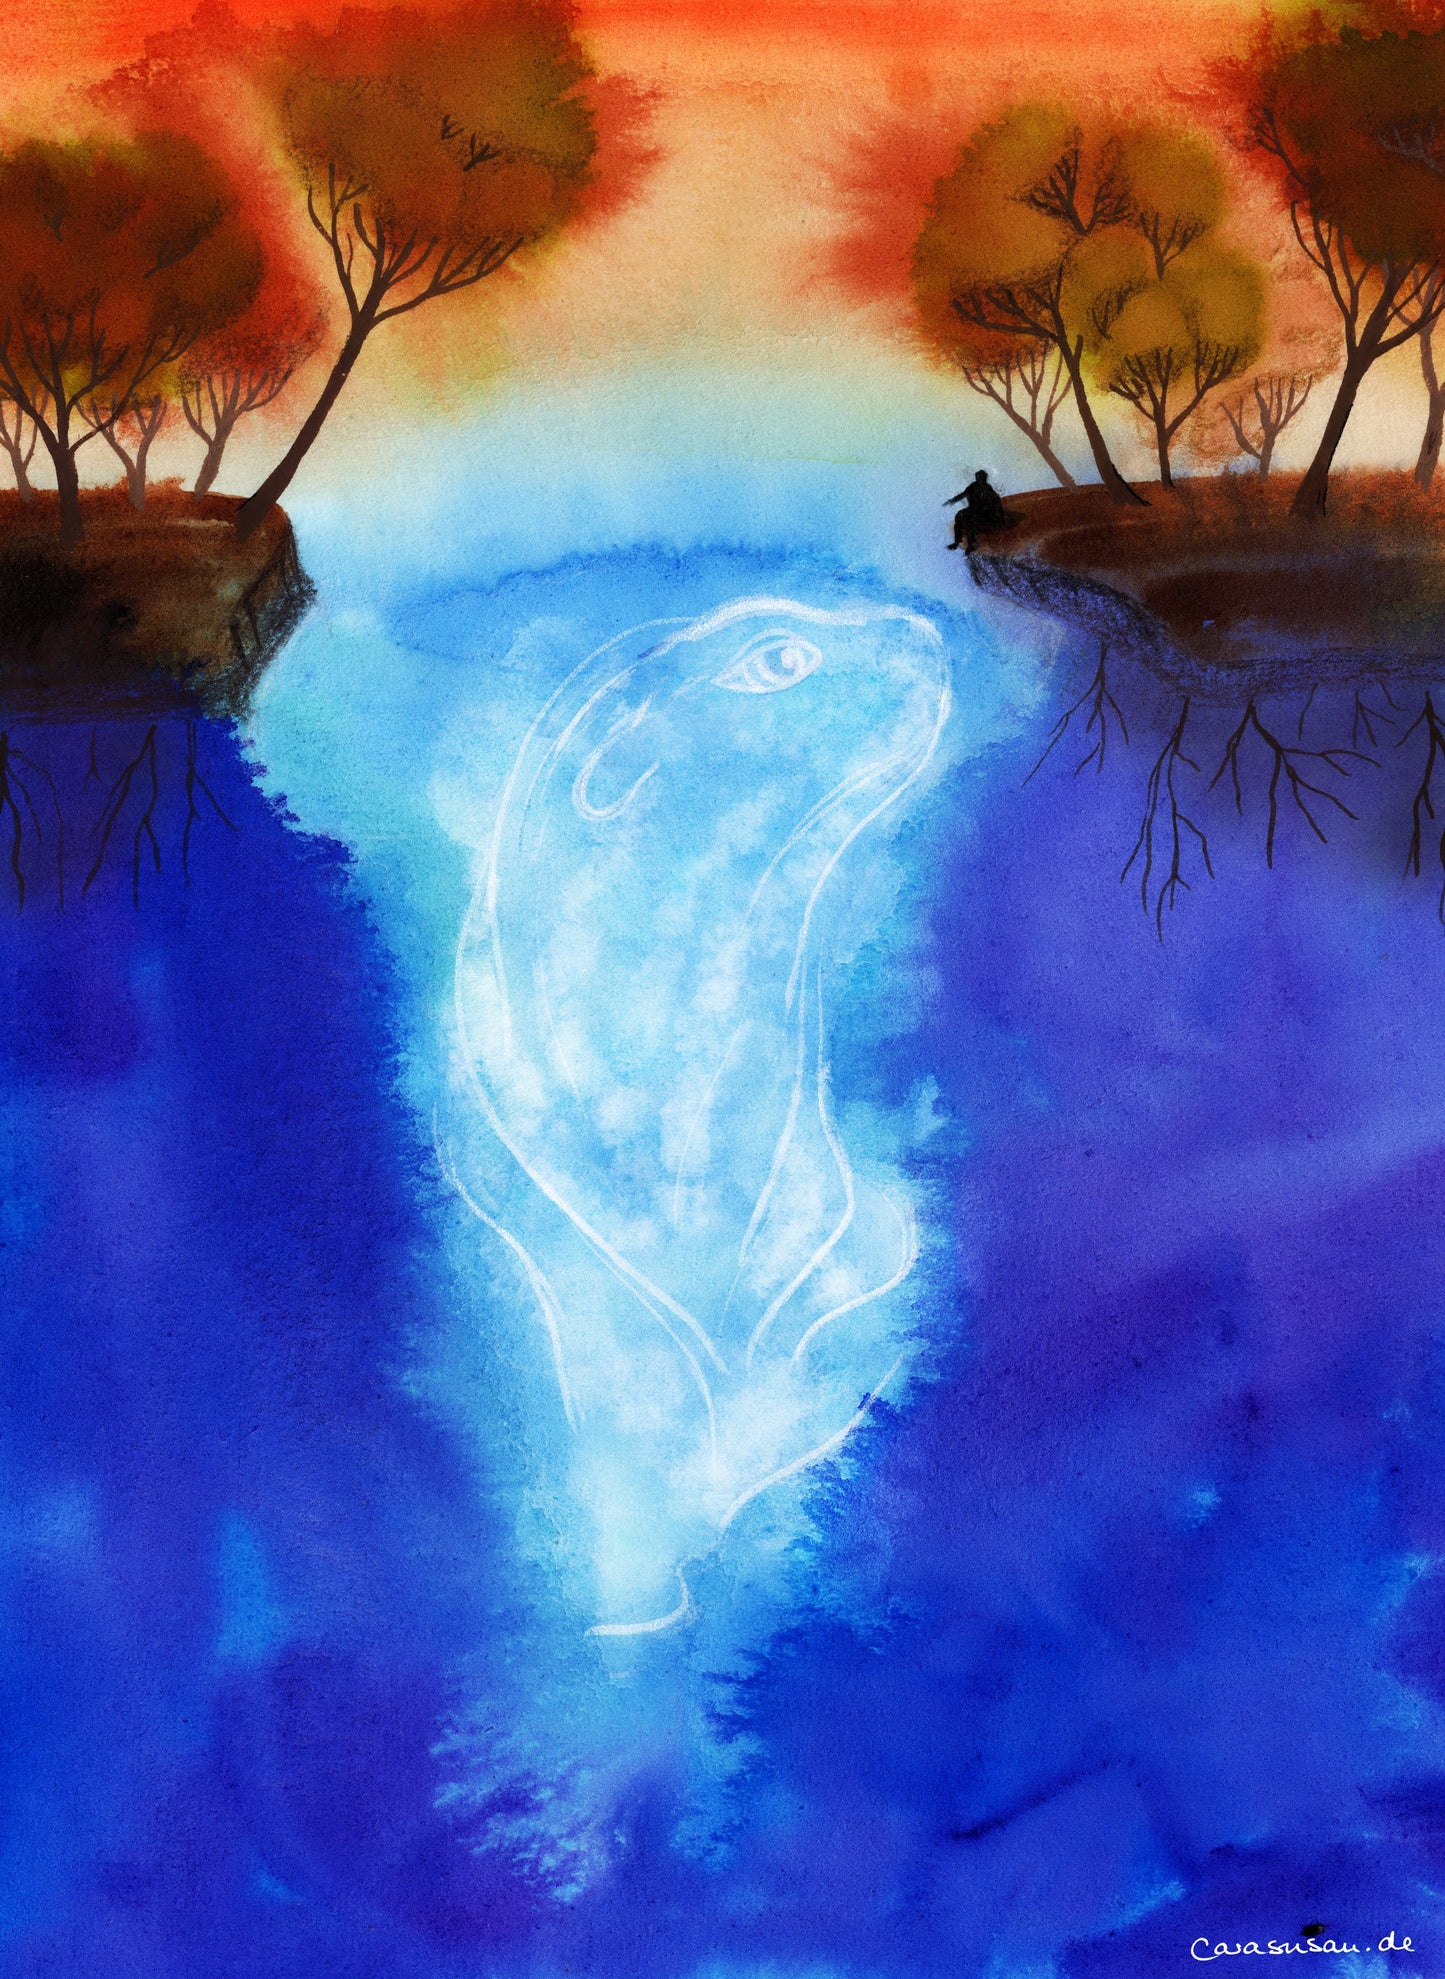 Watercolor 'Geist aus der Tiefen' art print on fine watercolor paper 25x34cm - hand-signed and limited